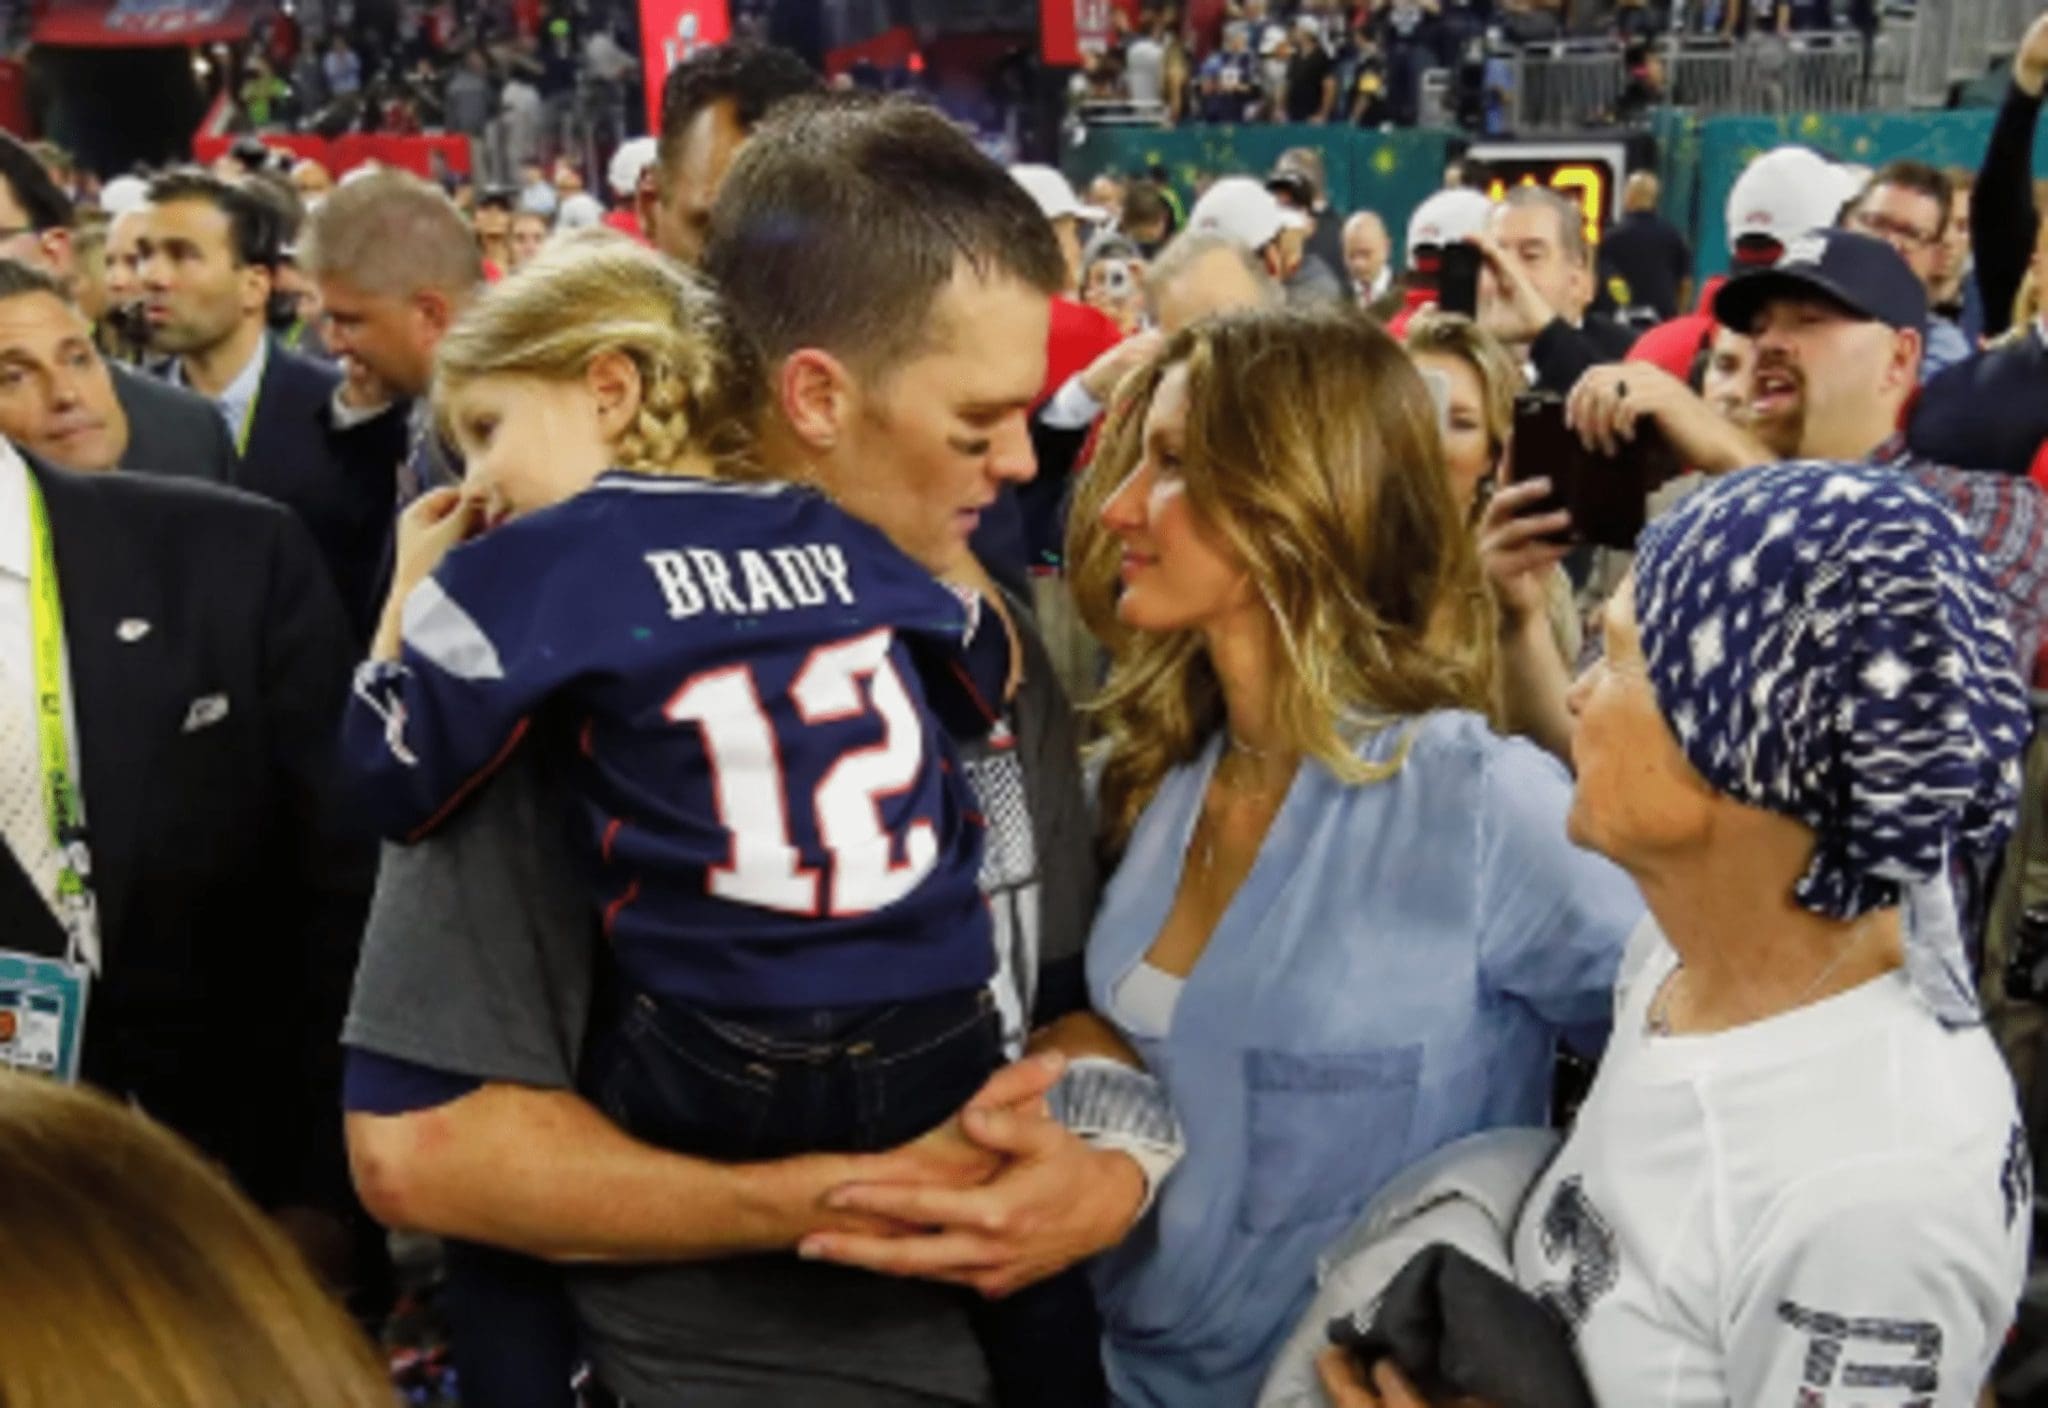 According to reports, Gisele Bündchen issued an ultimatum to Tom Brady regarding their marriage.